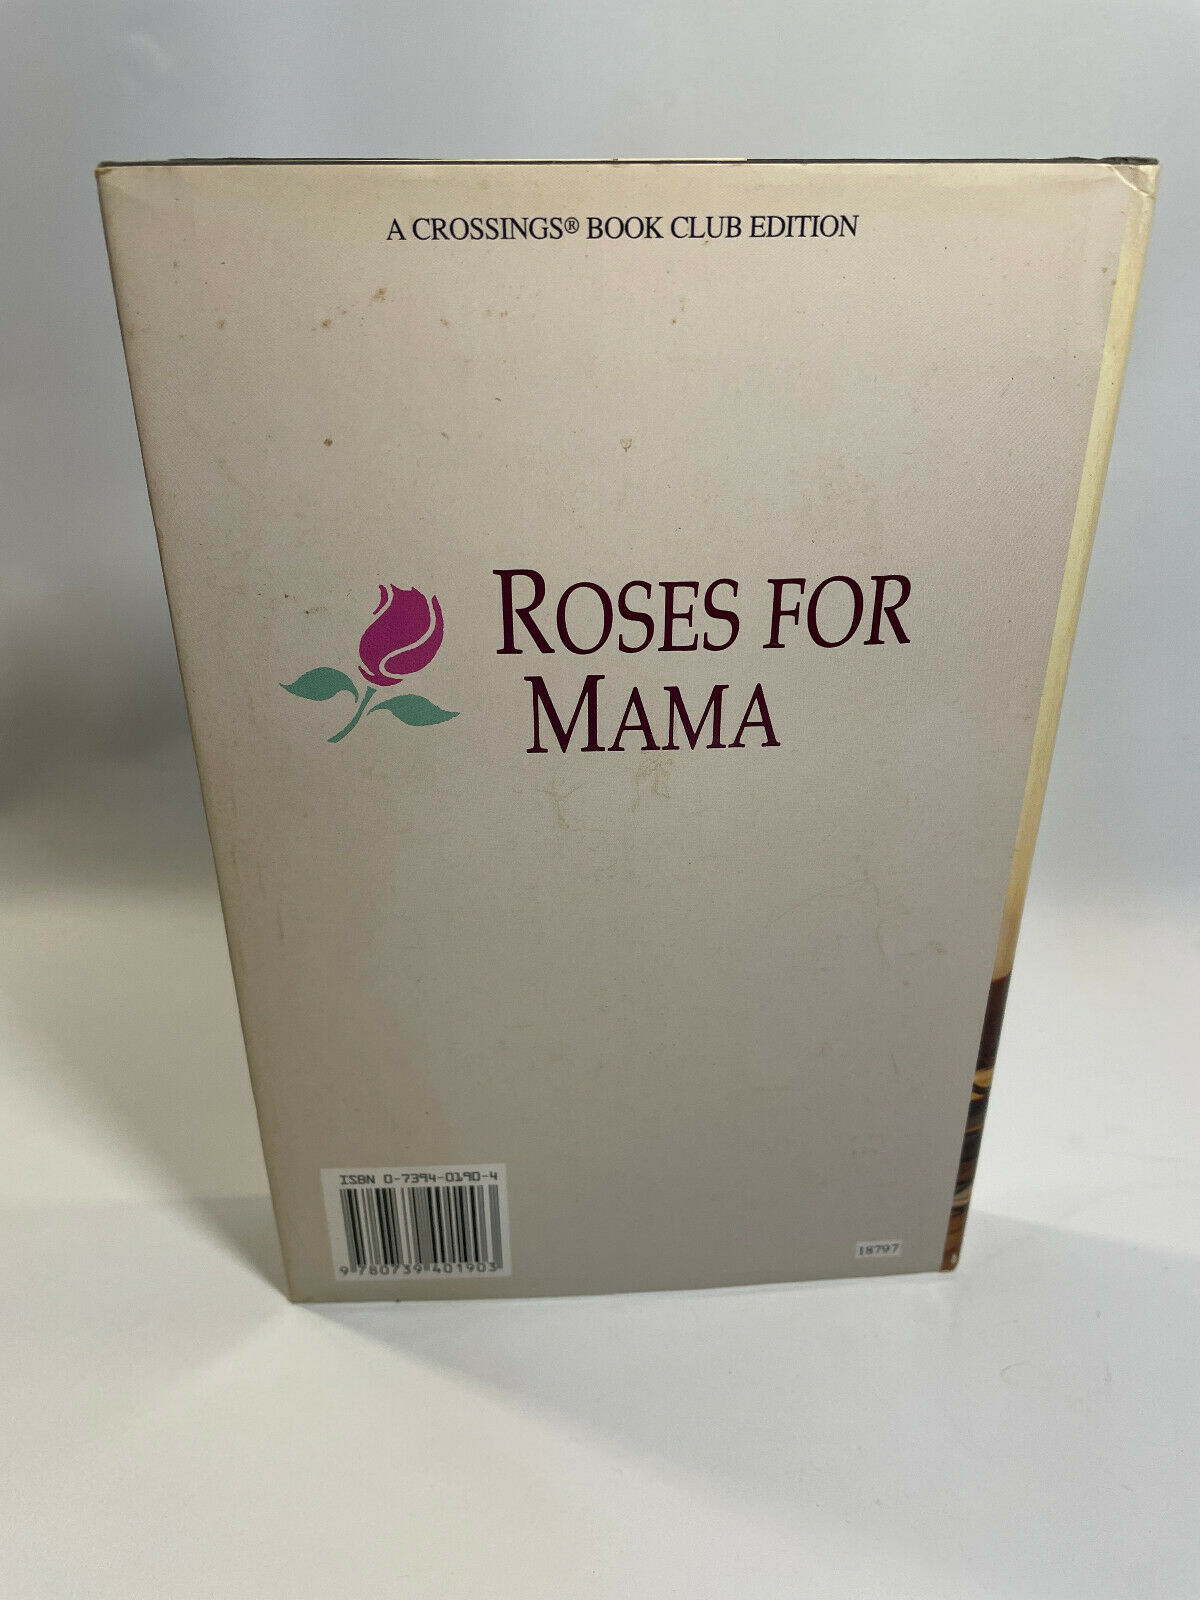 Women of the West Ser.: Roses for Mama by Janette Oke 1991 (A1)